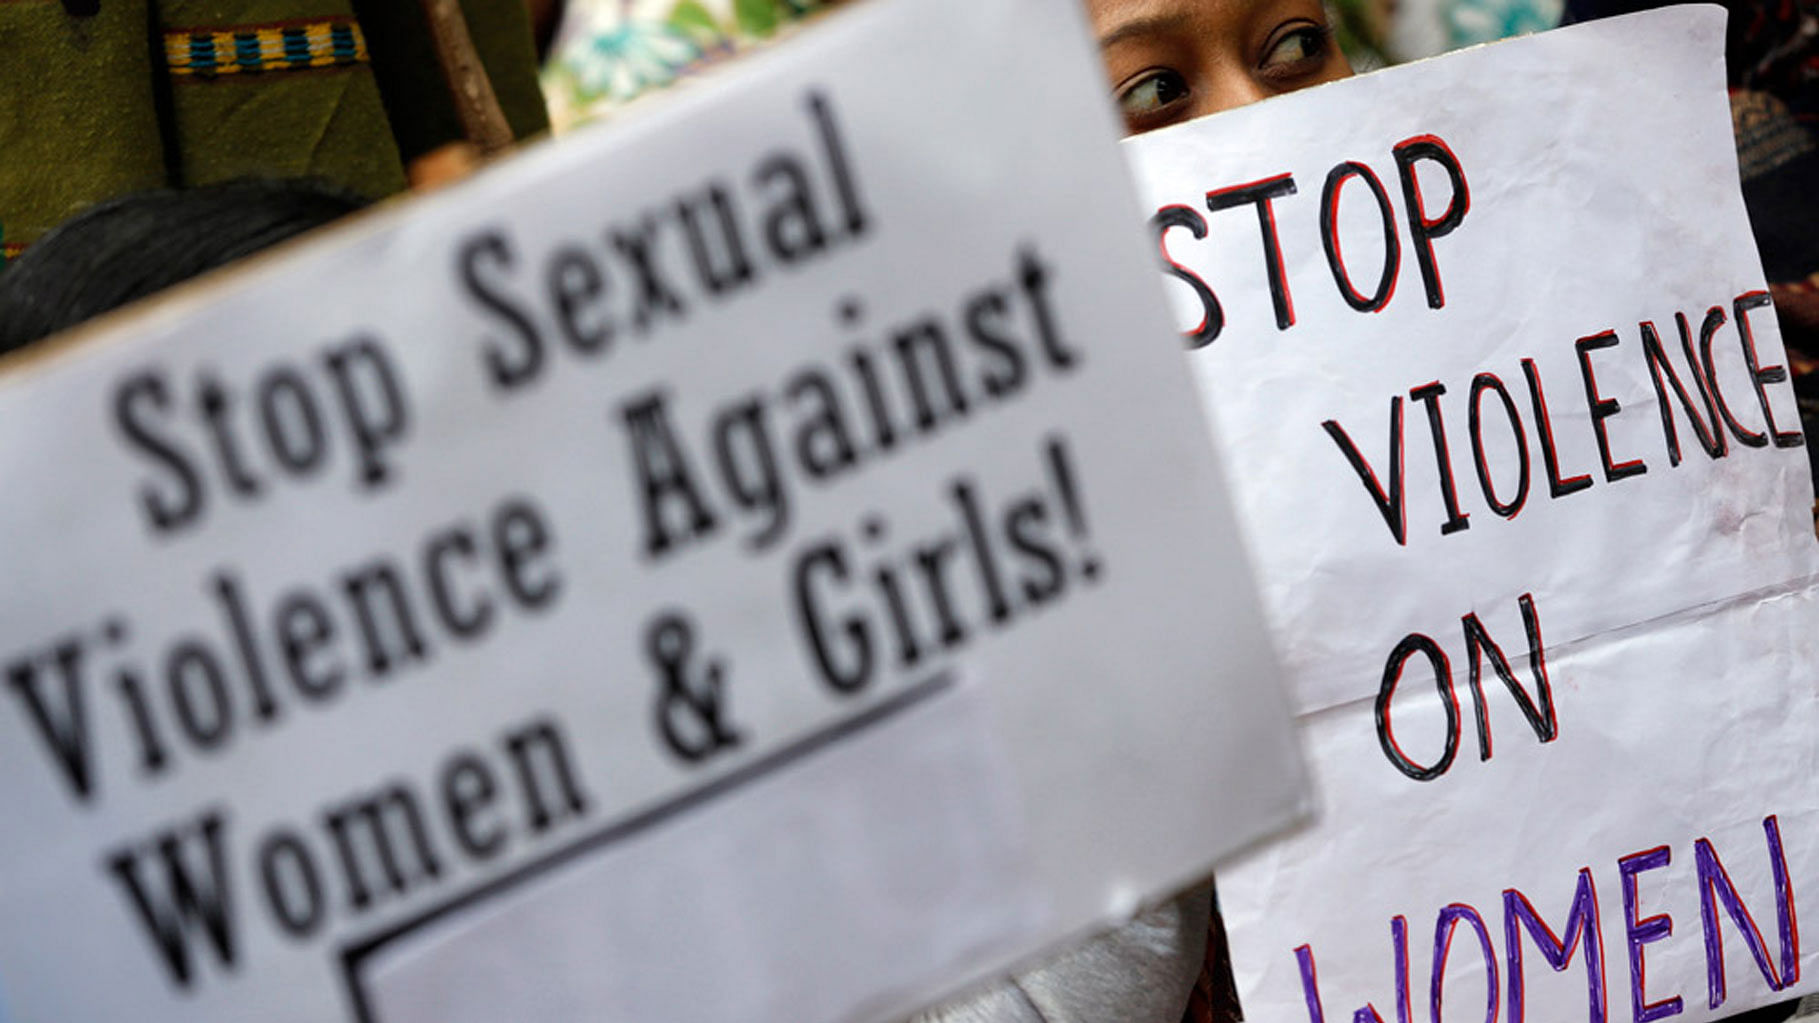 Representational image of protest against sexual violence.